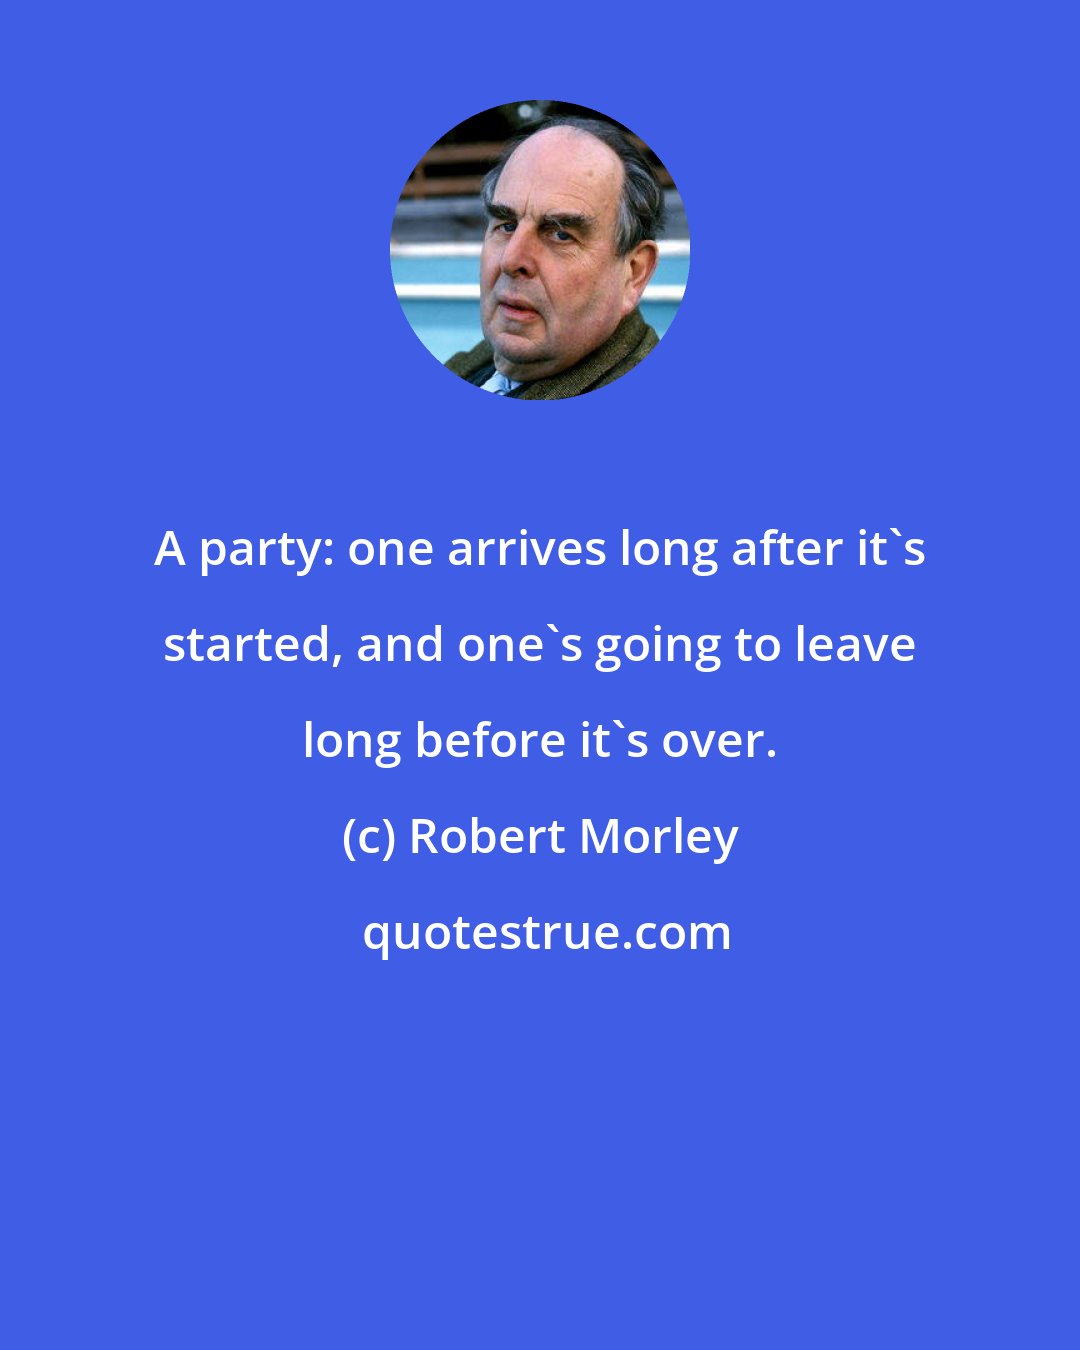 Robert Morley: A party: one arrives long after it's started, and one's going to leave long before it's over.